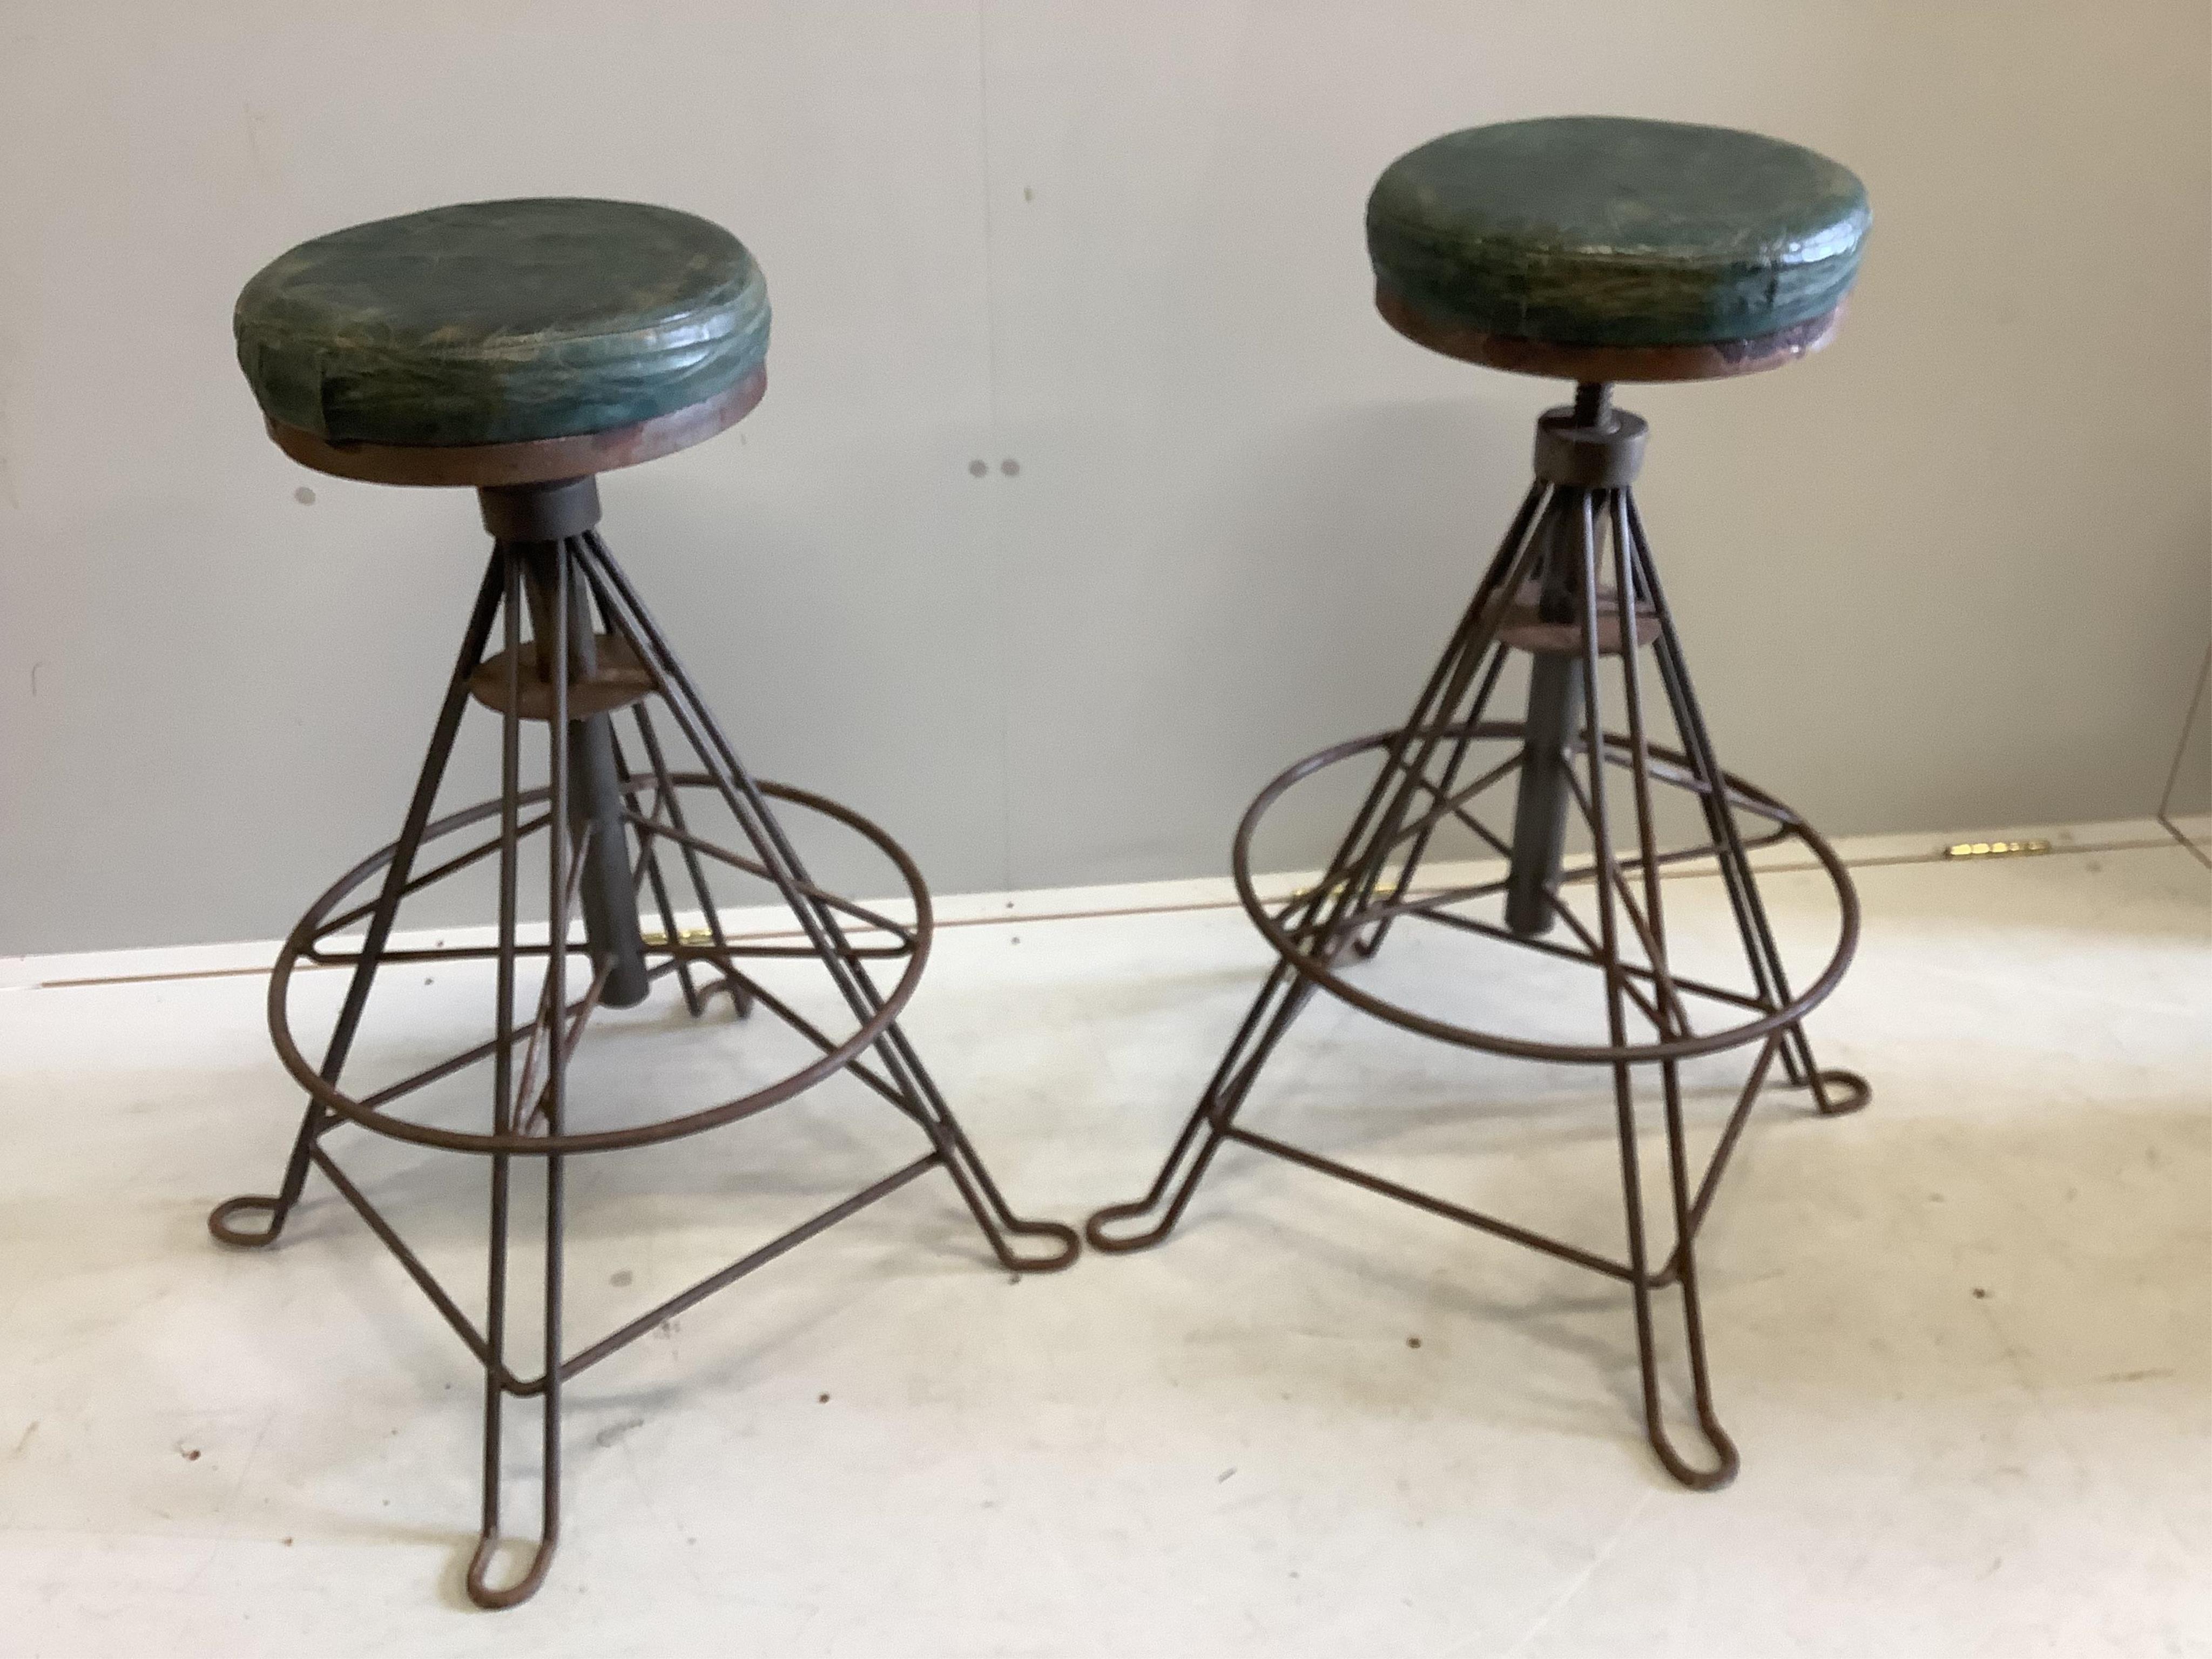 A pair of industrial style wrought iron adjustable stools